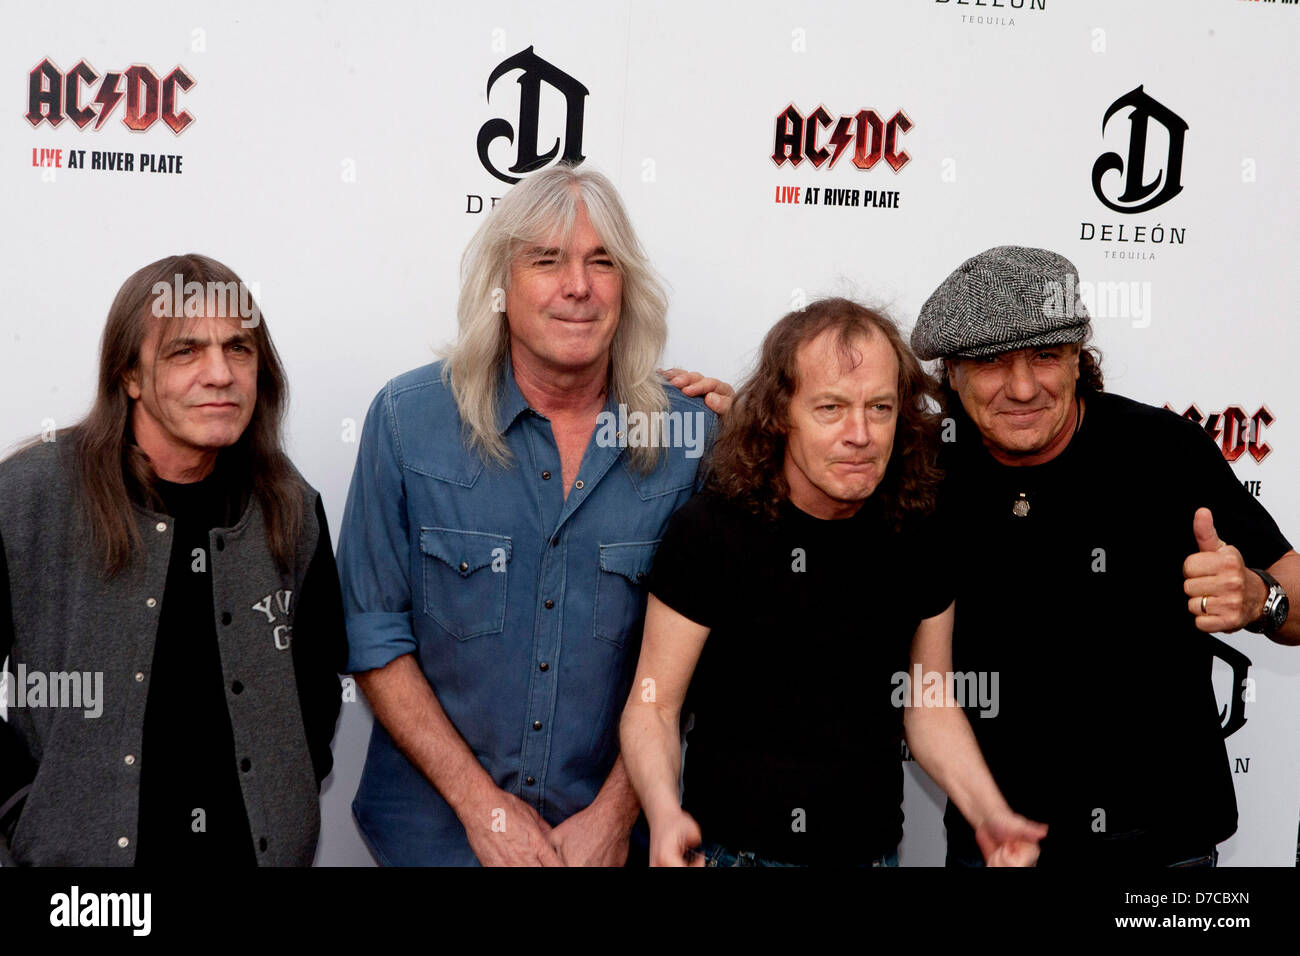 Malcolm Young, Cliff Williams, Angus Young and Brian Johnson of AC/DC Premiere of 'AC/DC Live at River Plate' at Photo Alamy